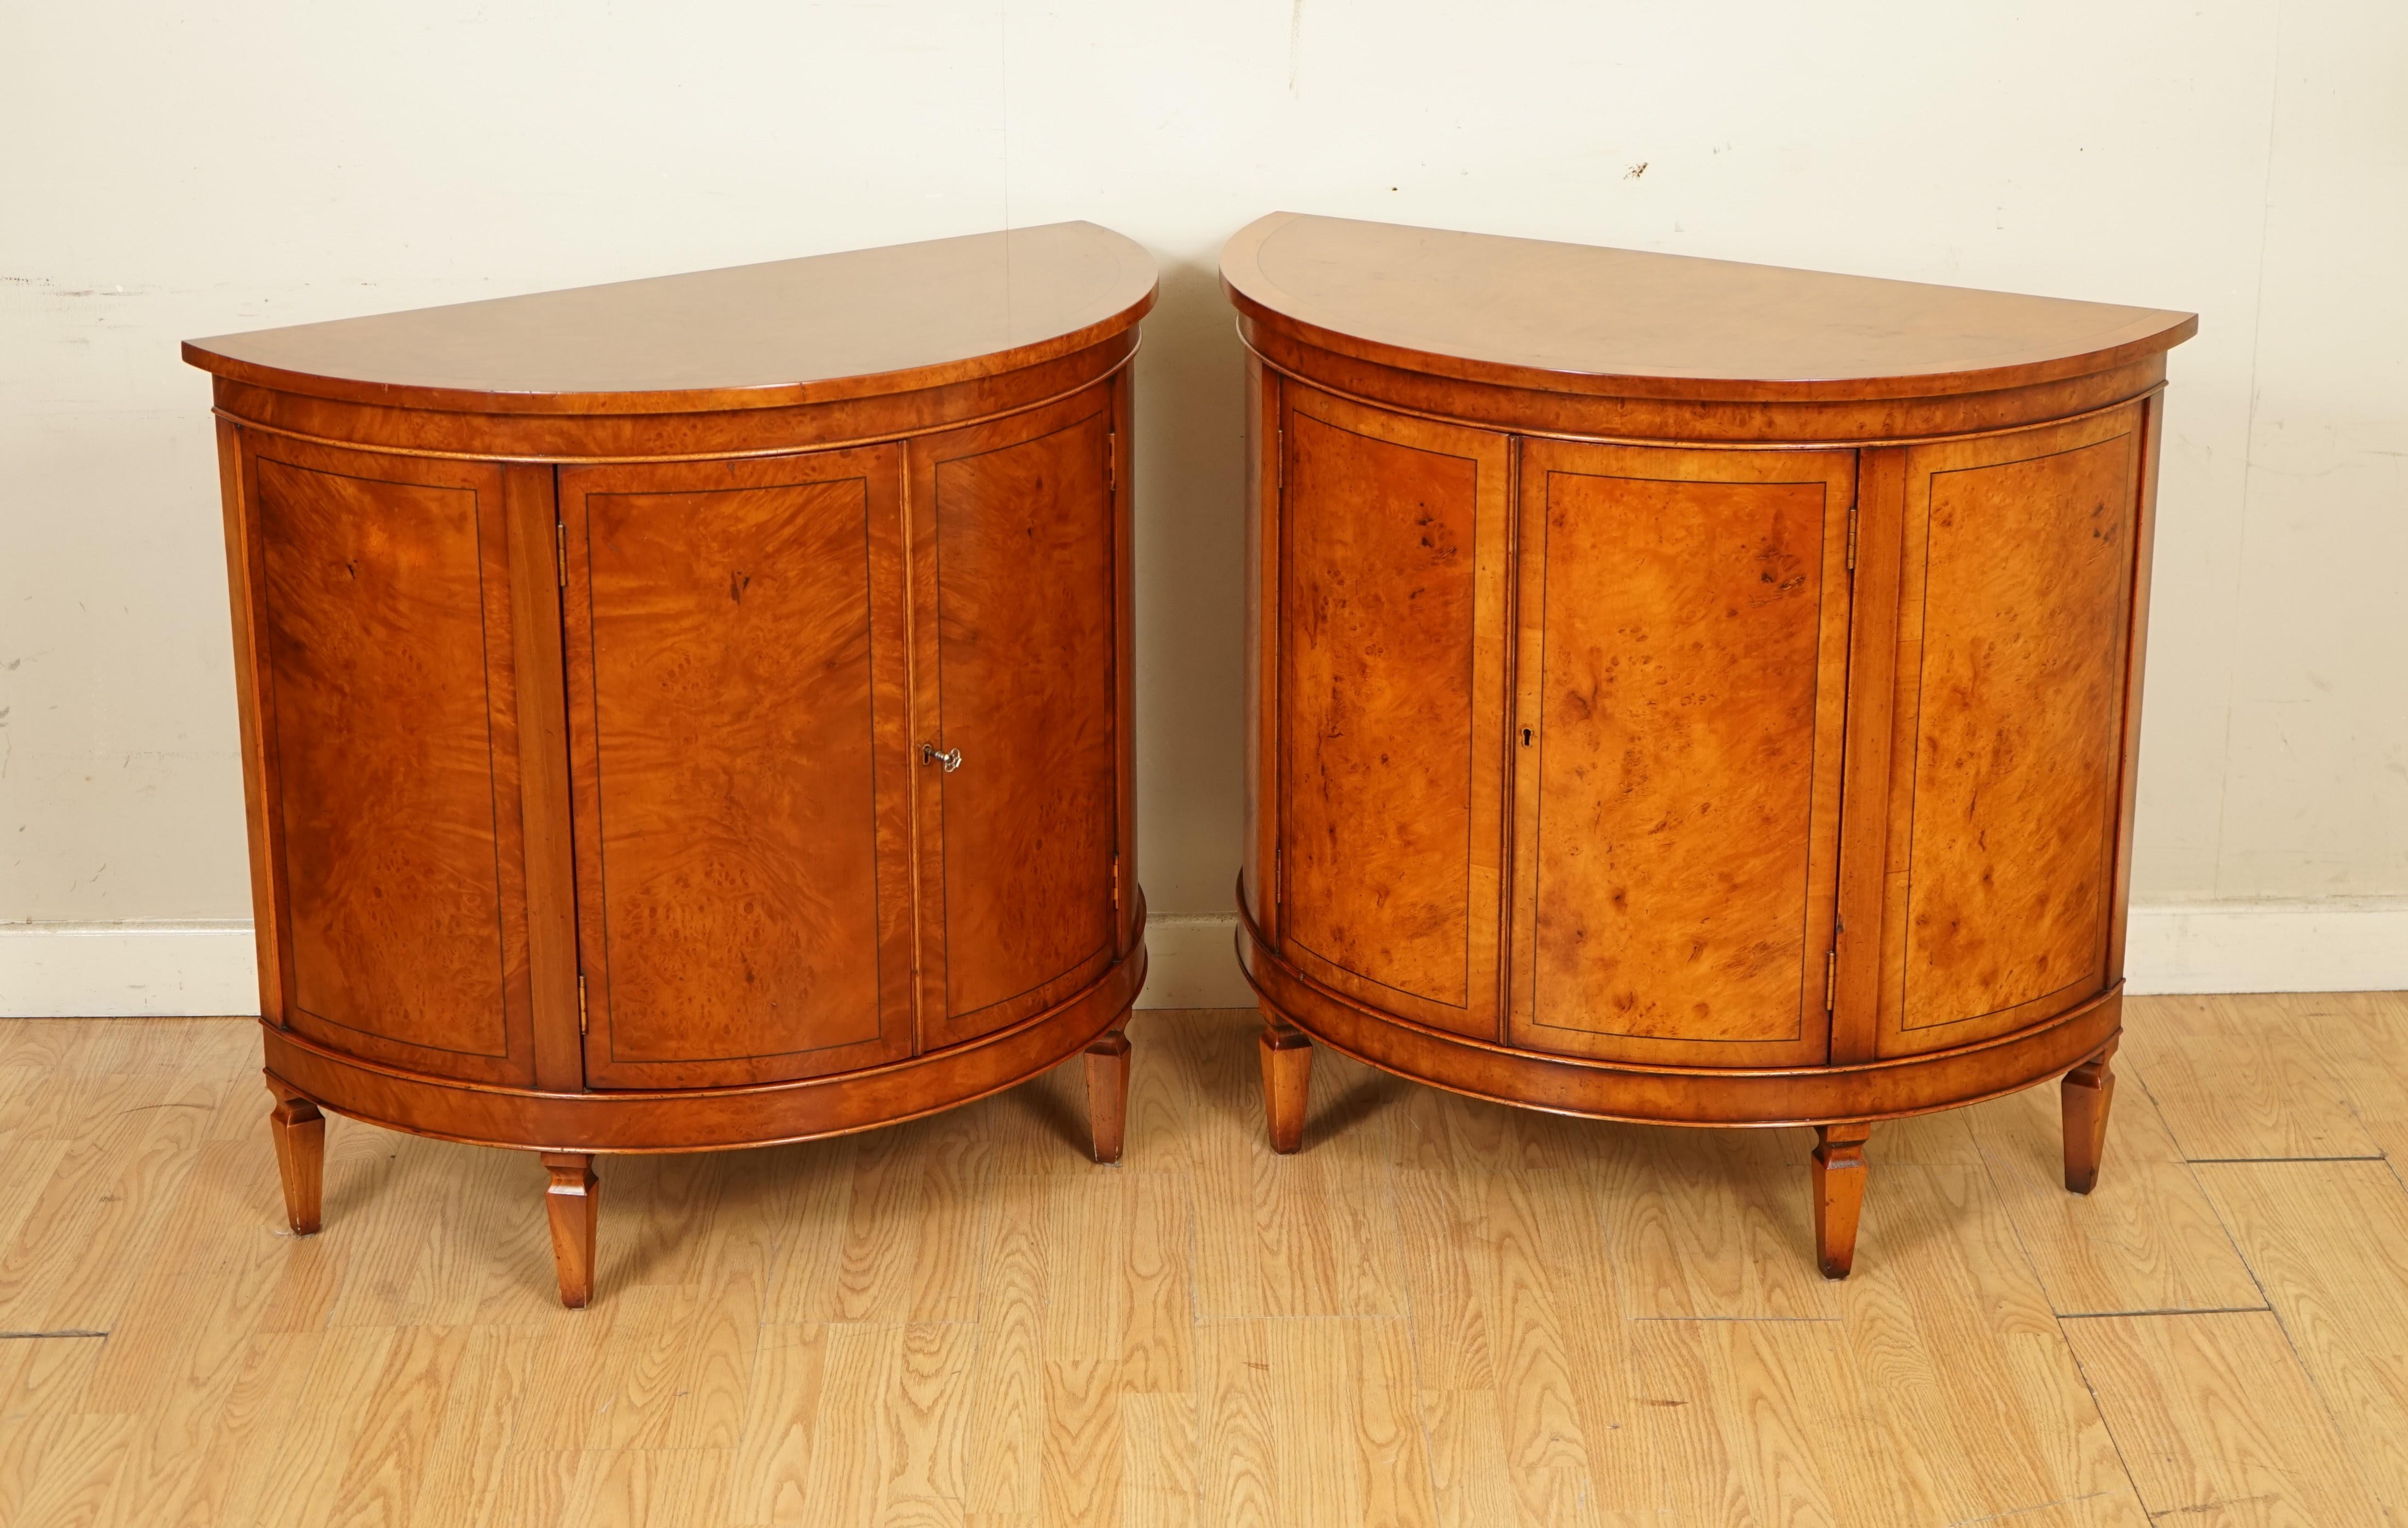 We are so excited to present to you this Beautiful Matched Pair Burr Walnut Demi Lune Cabinets.

We have lightly restored this by giving it a hand clean all over, hand waxed and hand polished. 

Please carefully look at the pictures to see the